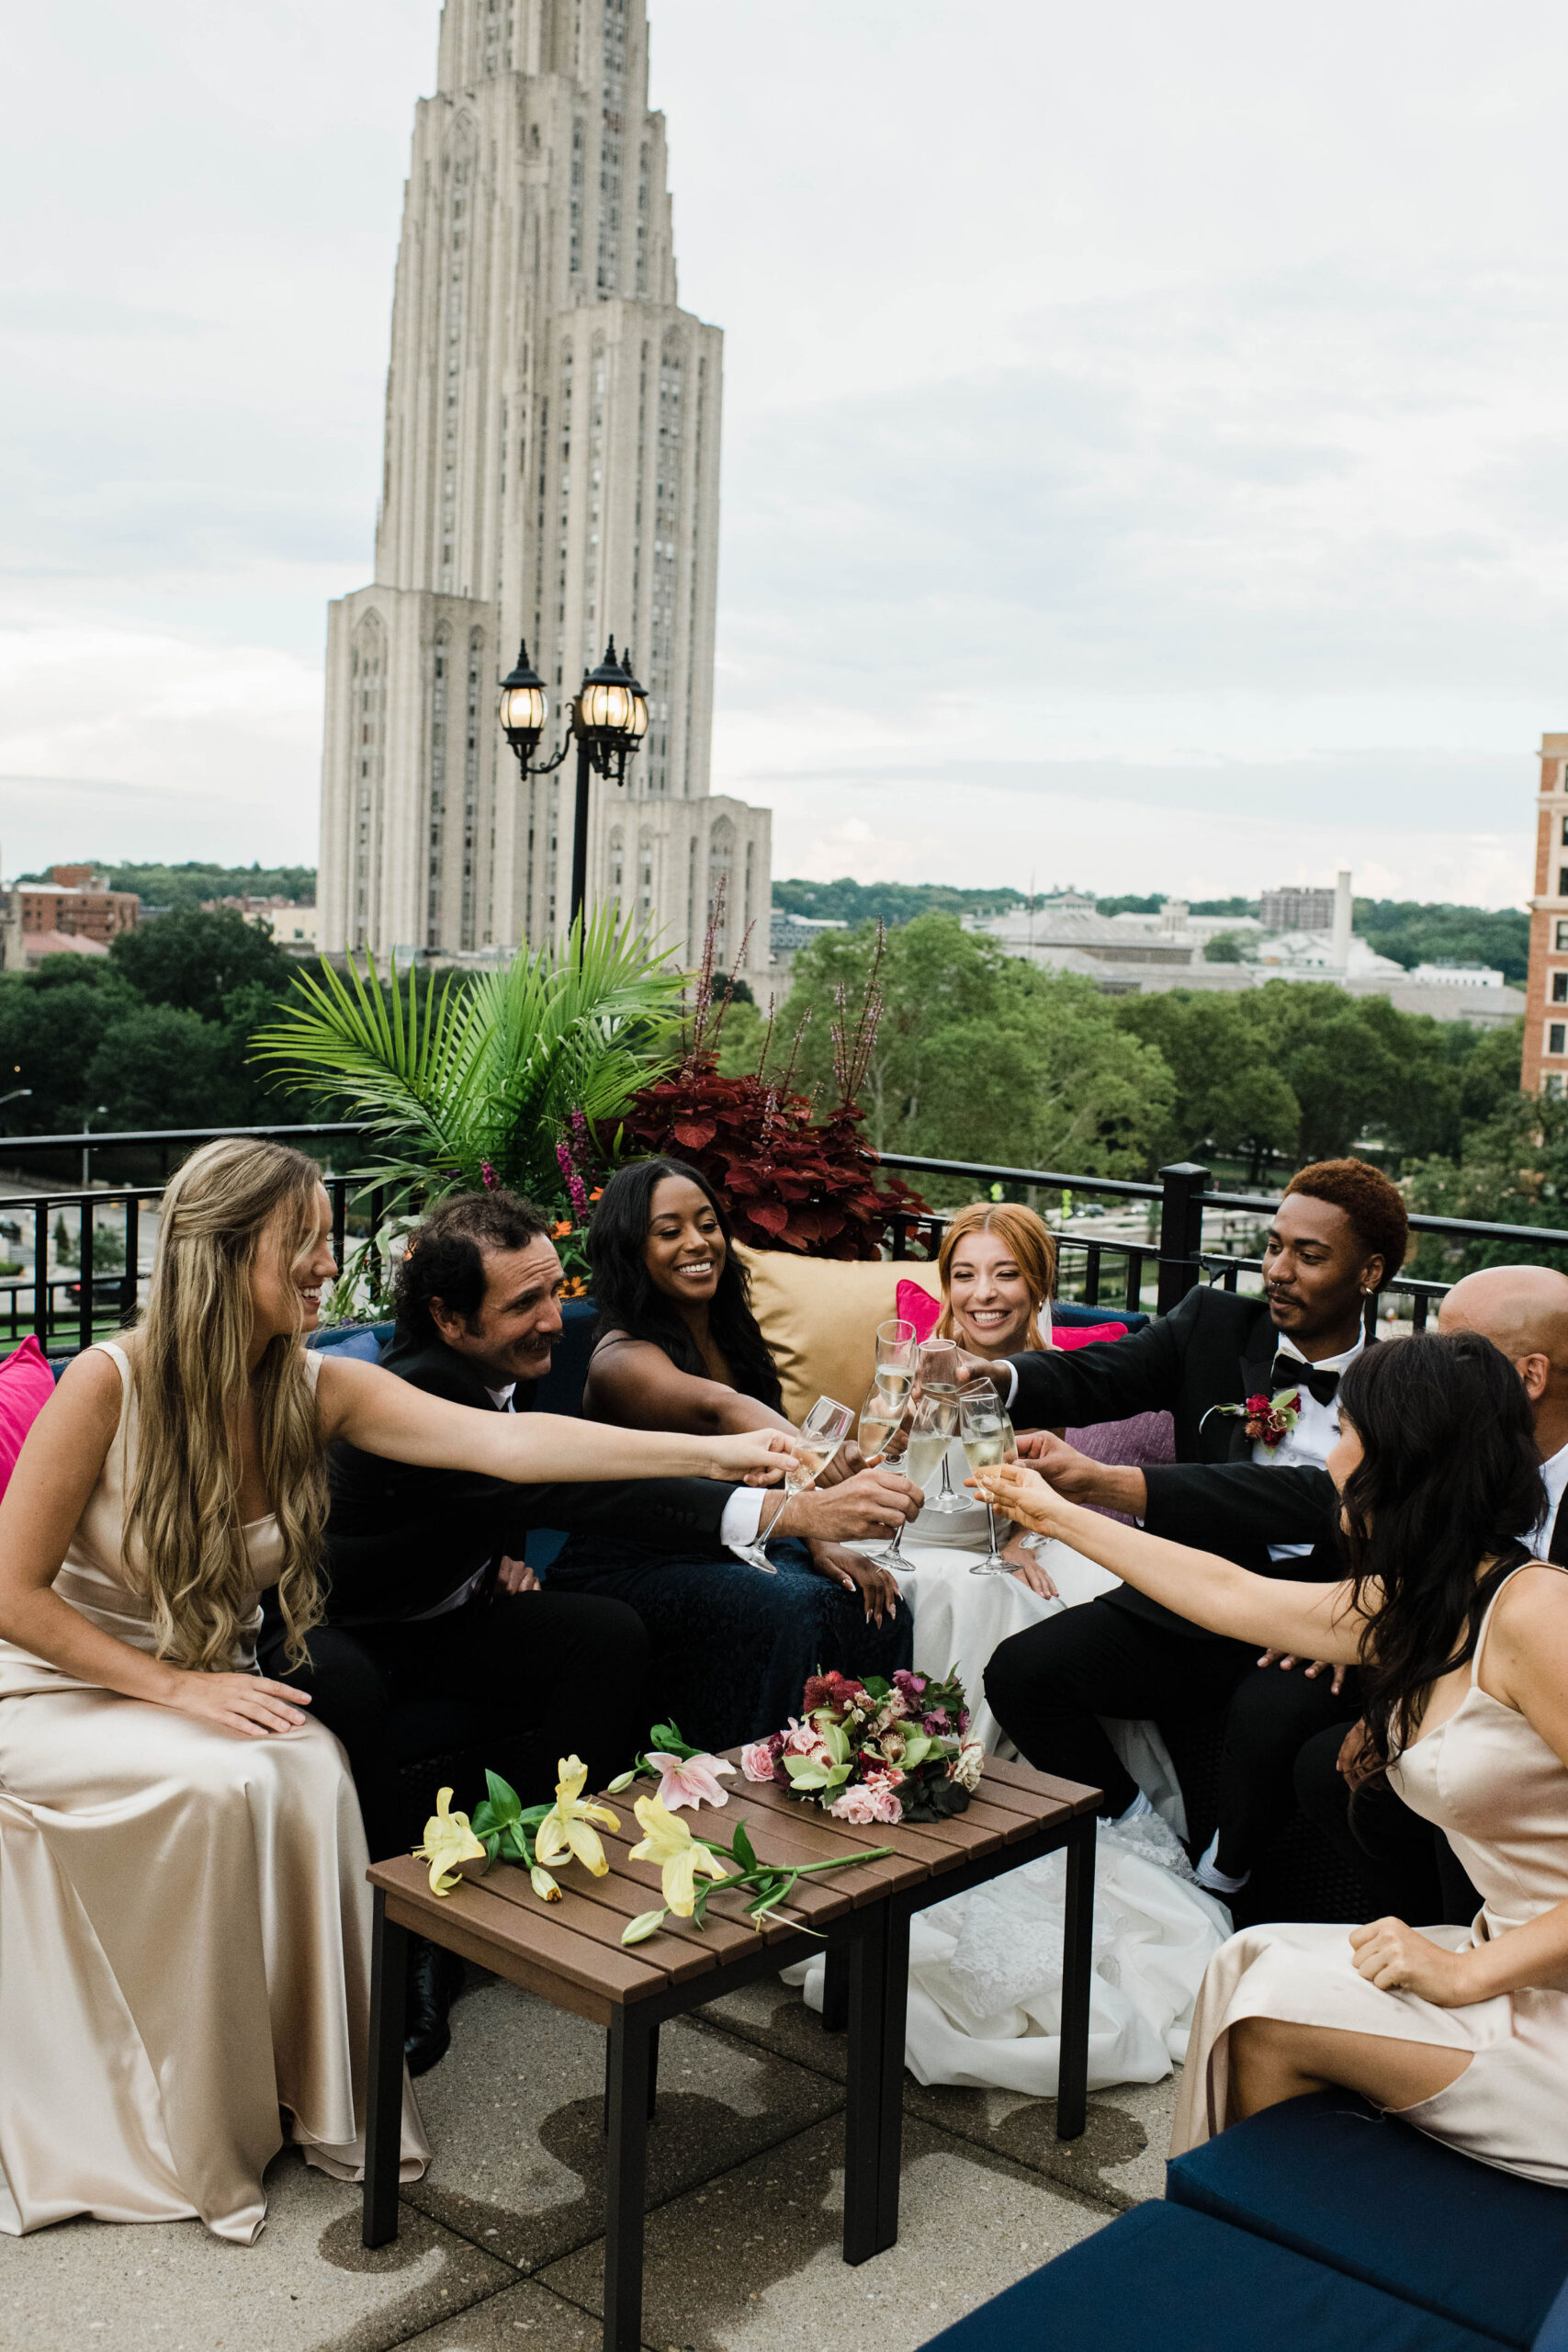 A photo of a wedding party clinking champagne glasses at the Rooftop Terrace at The University Club. The Cathedral of Learning and trees are in the background.